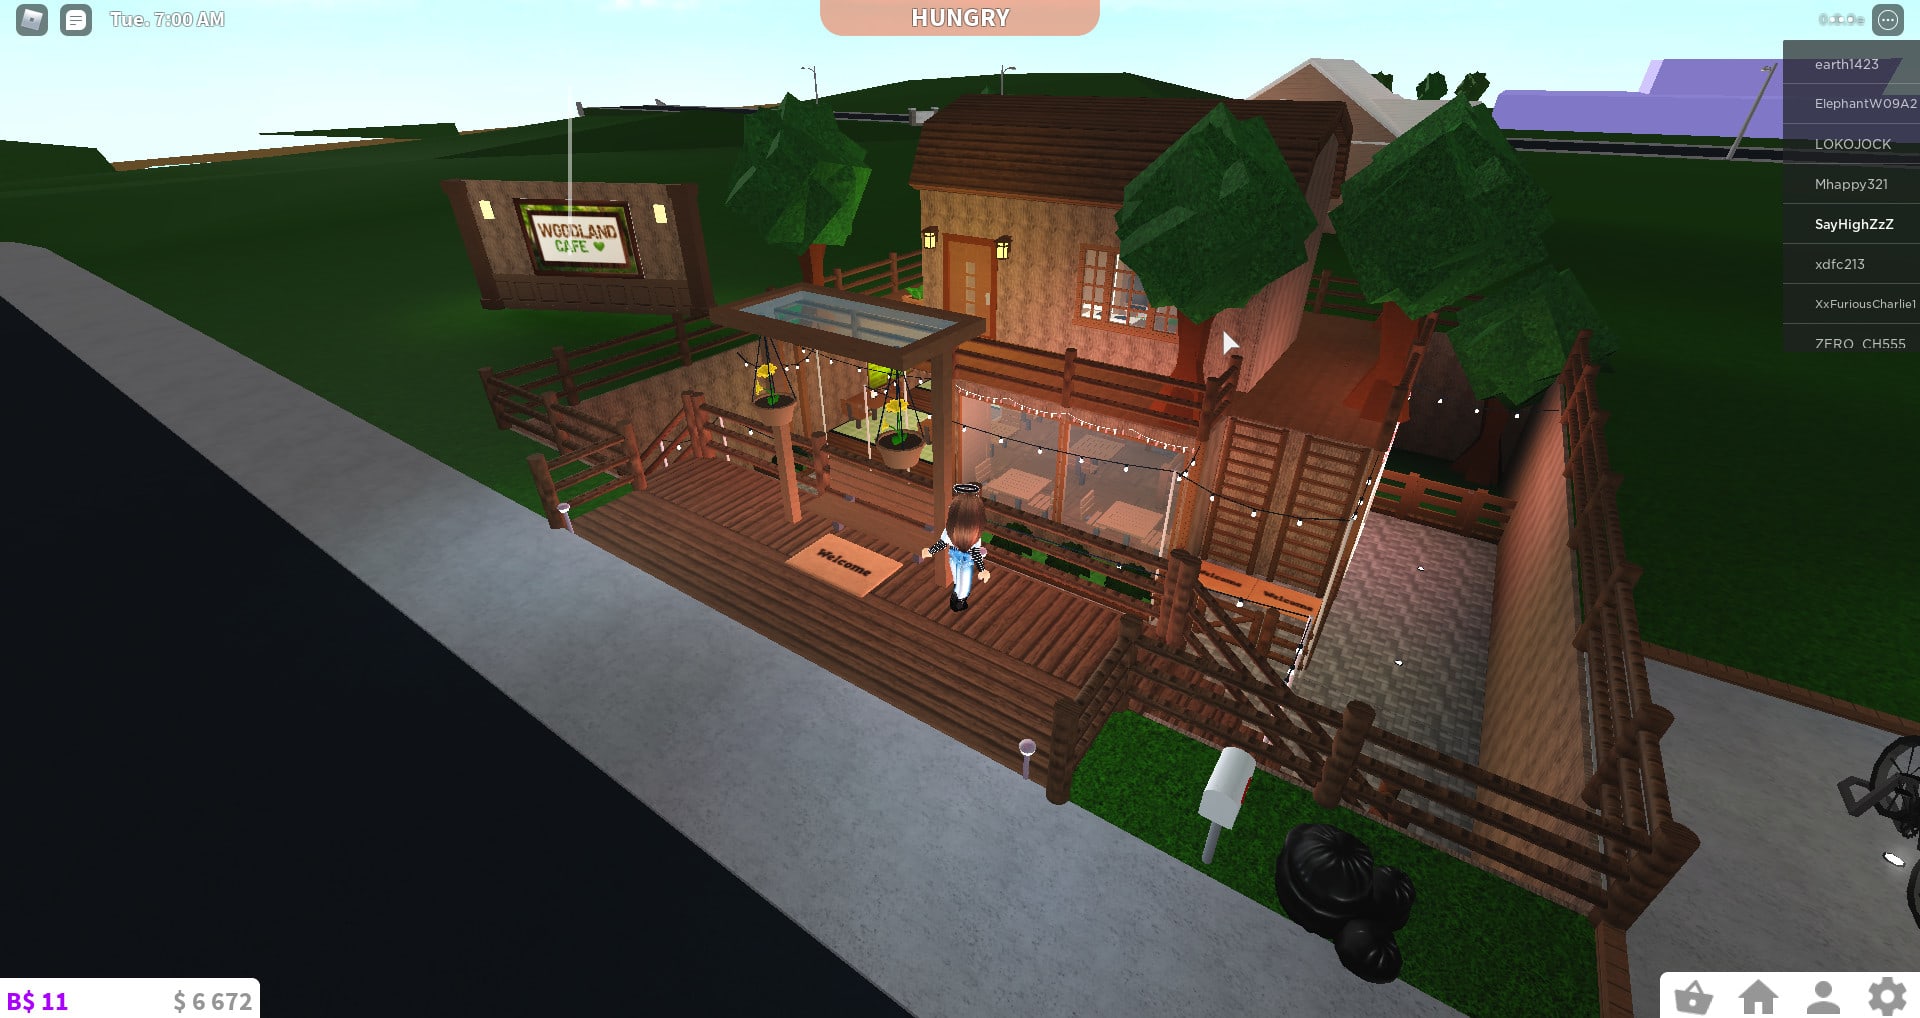 Build You A Nice Cafe Or Restaurant On Roblox Bloxburg By Sayhighzz Fiverr - gaming cafe roblox